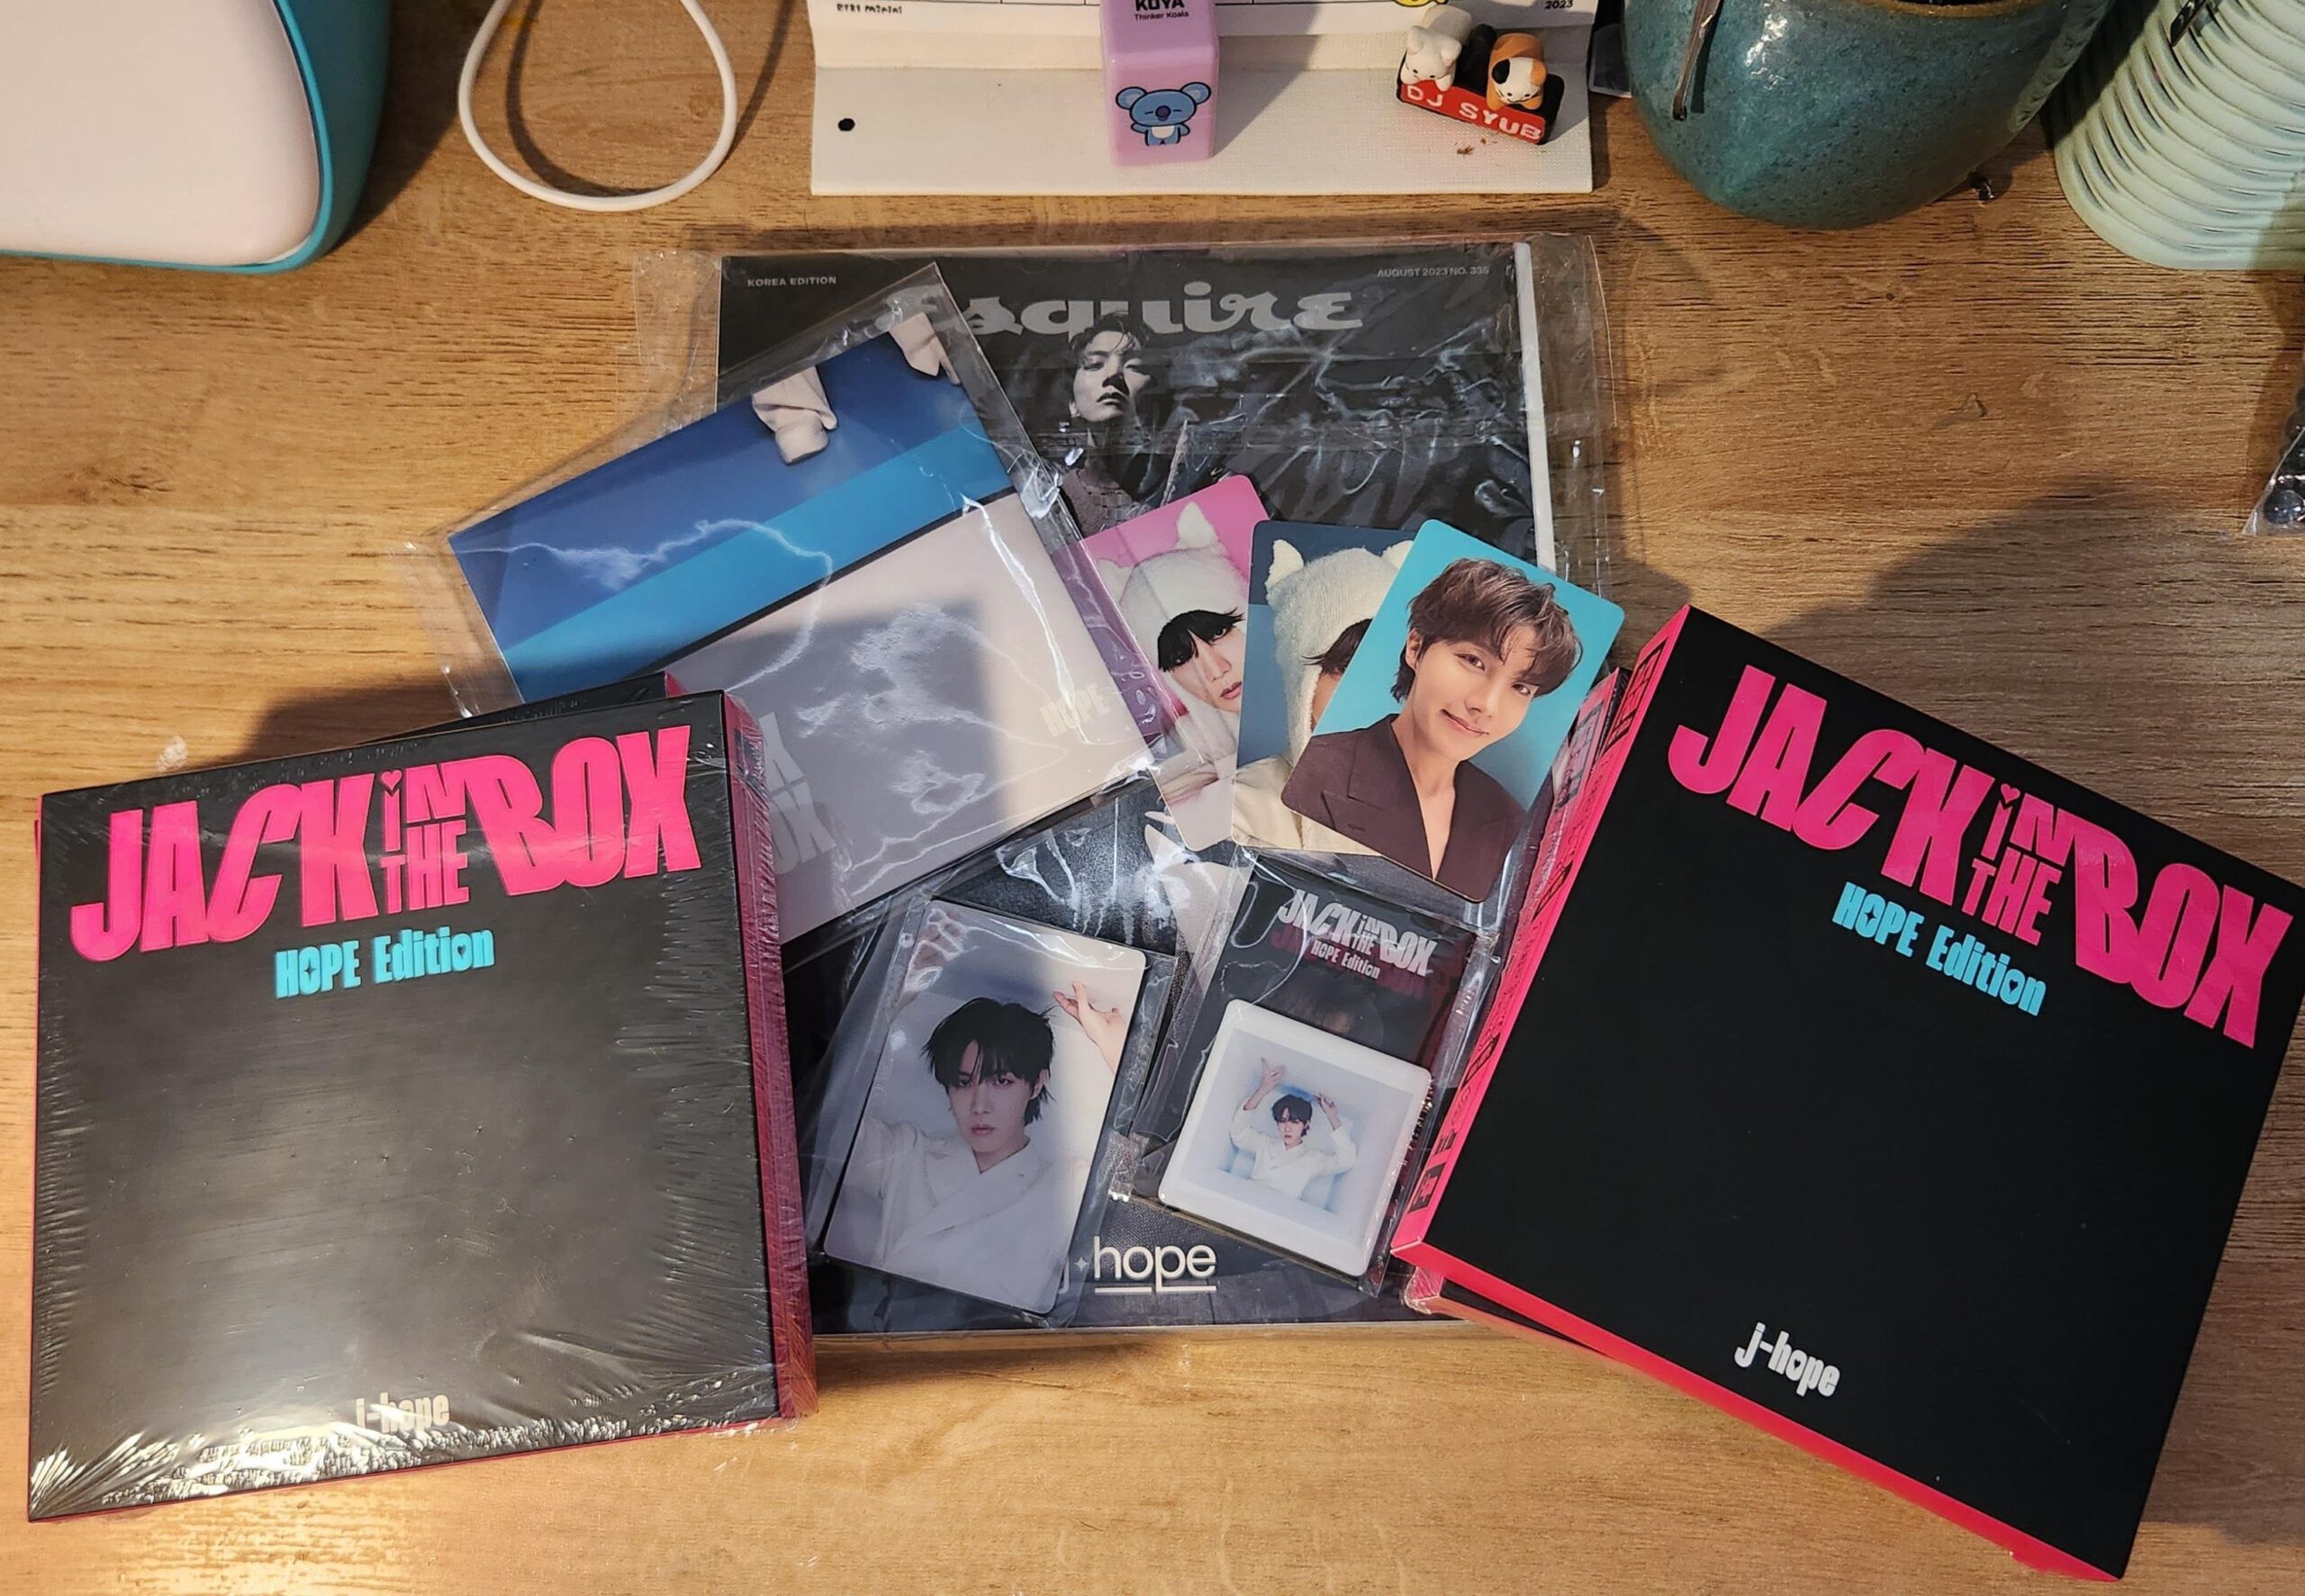 [GIVEAWAY] - WW - Jack In The Box Hope Edition albums, PCs, etc